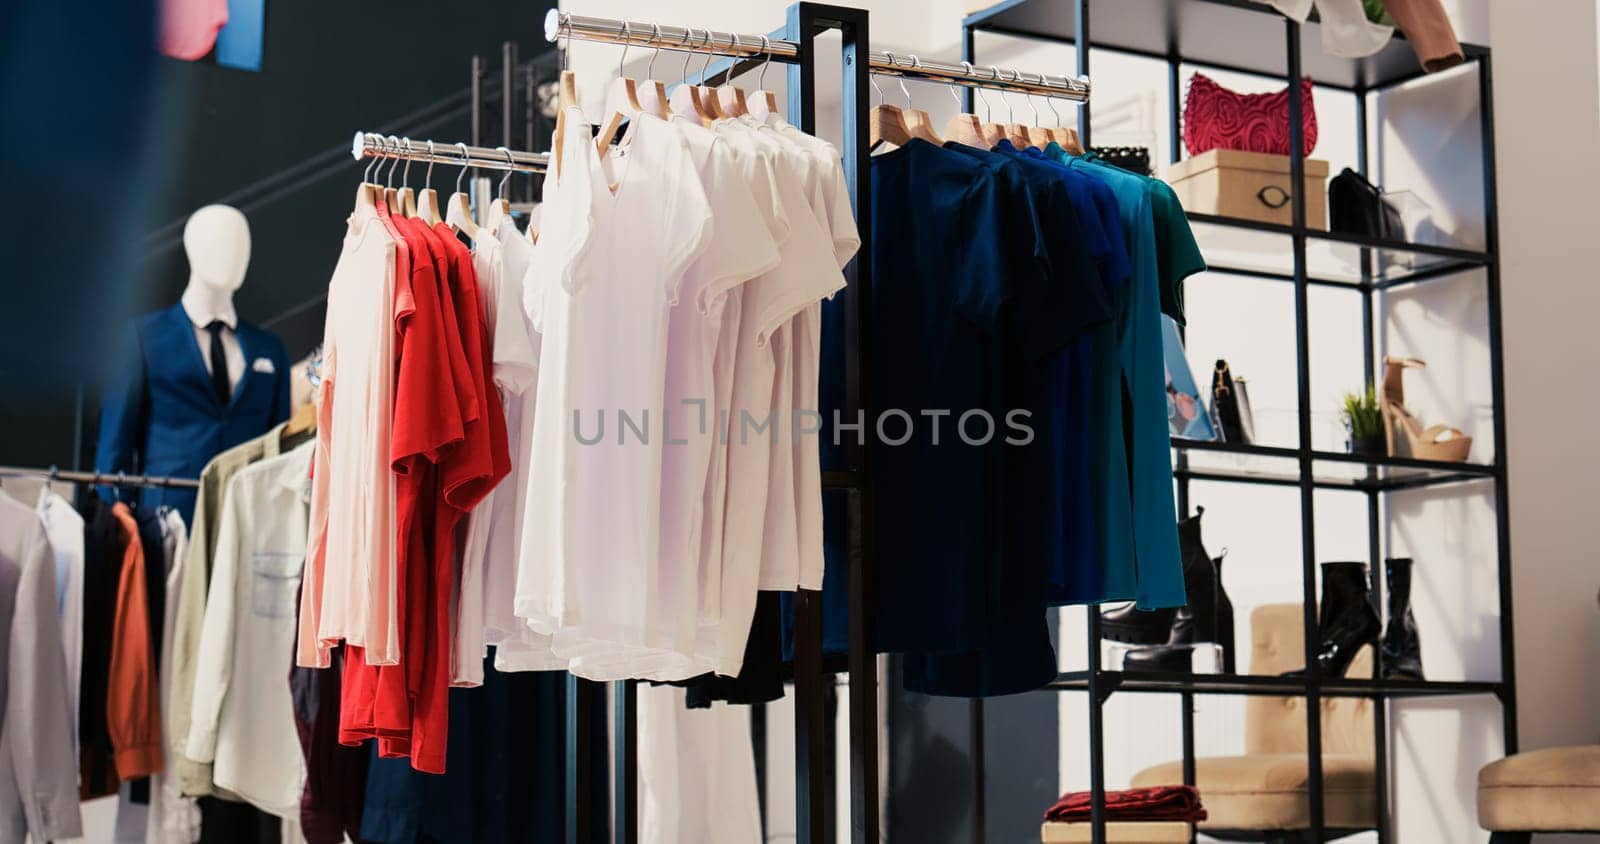 Modern boutique filled with casual wear, multiple racks with fashionable merchandise. Interior of empty clothing store with new fashion colletion on hangers. Small business concept.